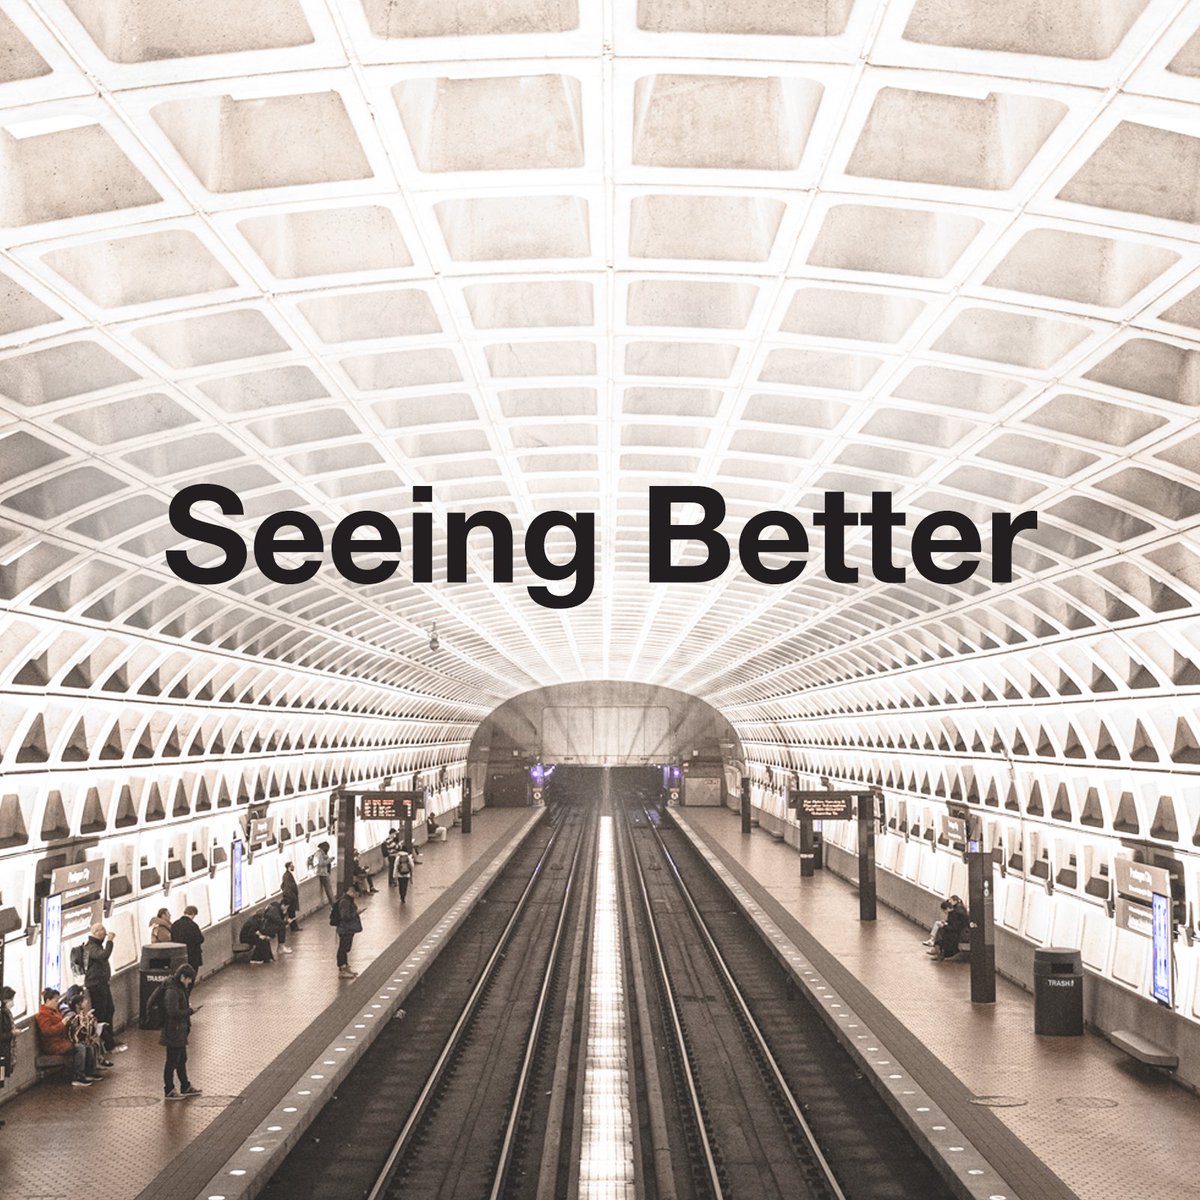 10x brighter. Now, you can see our signage, trains, and platforms more clearly. Visit wmata.com/safety to learn more. #wmata